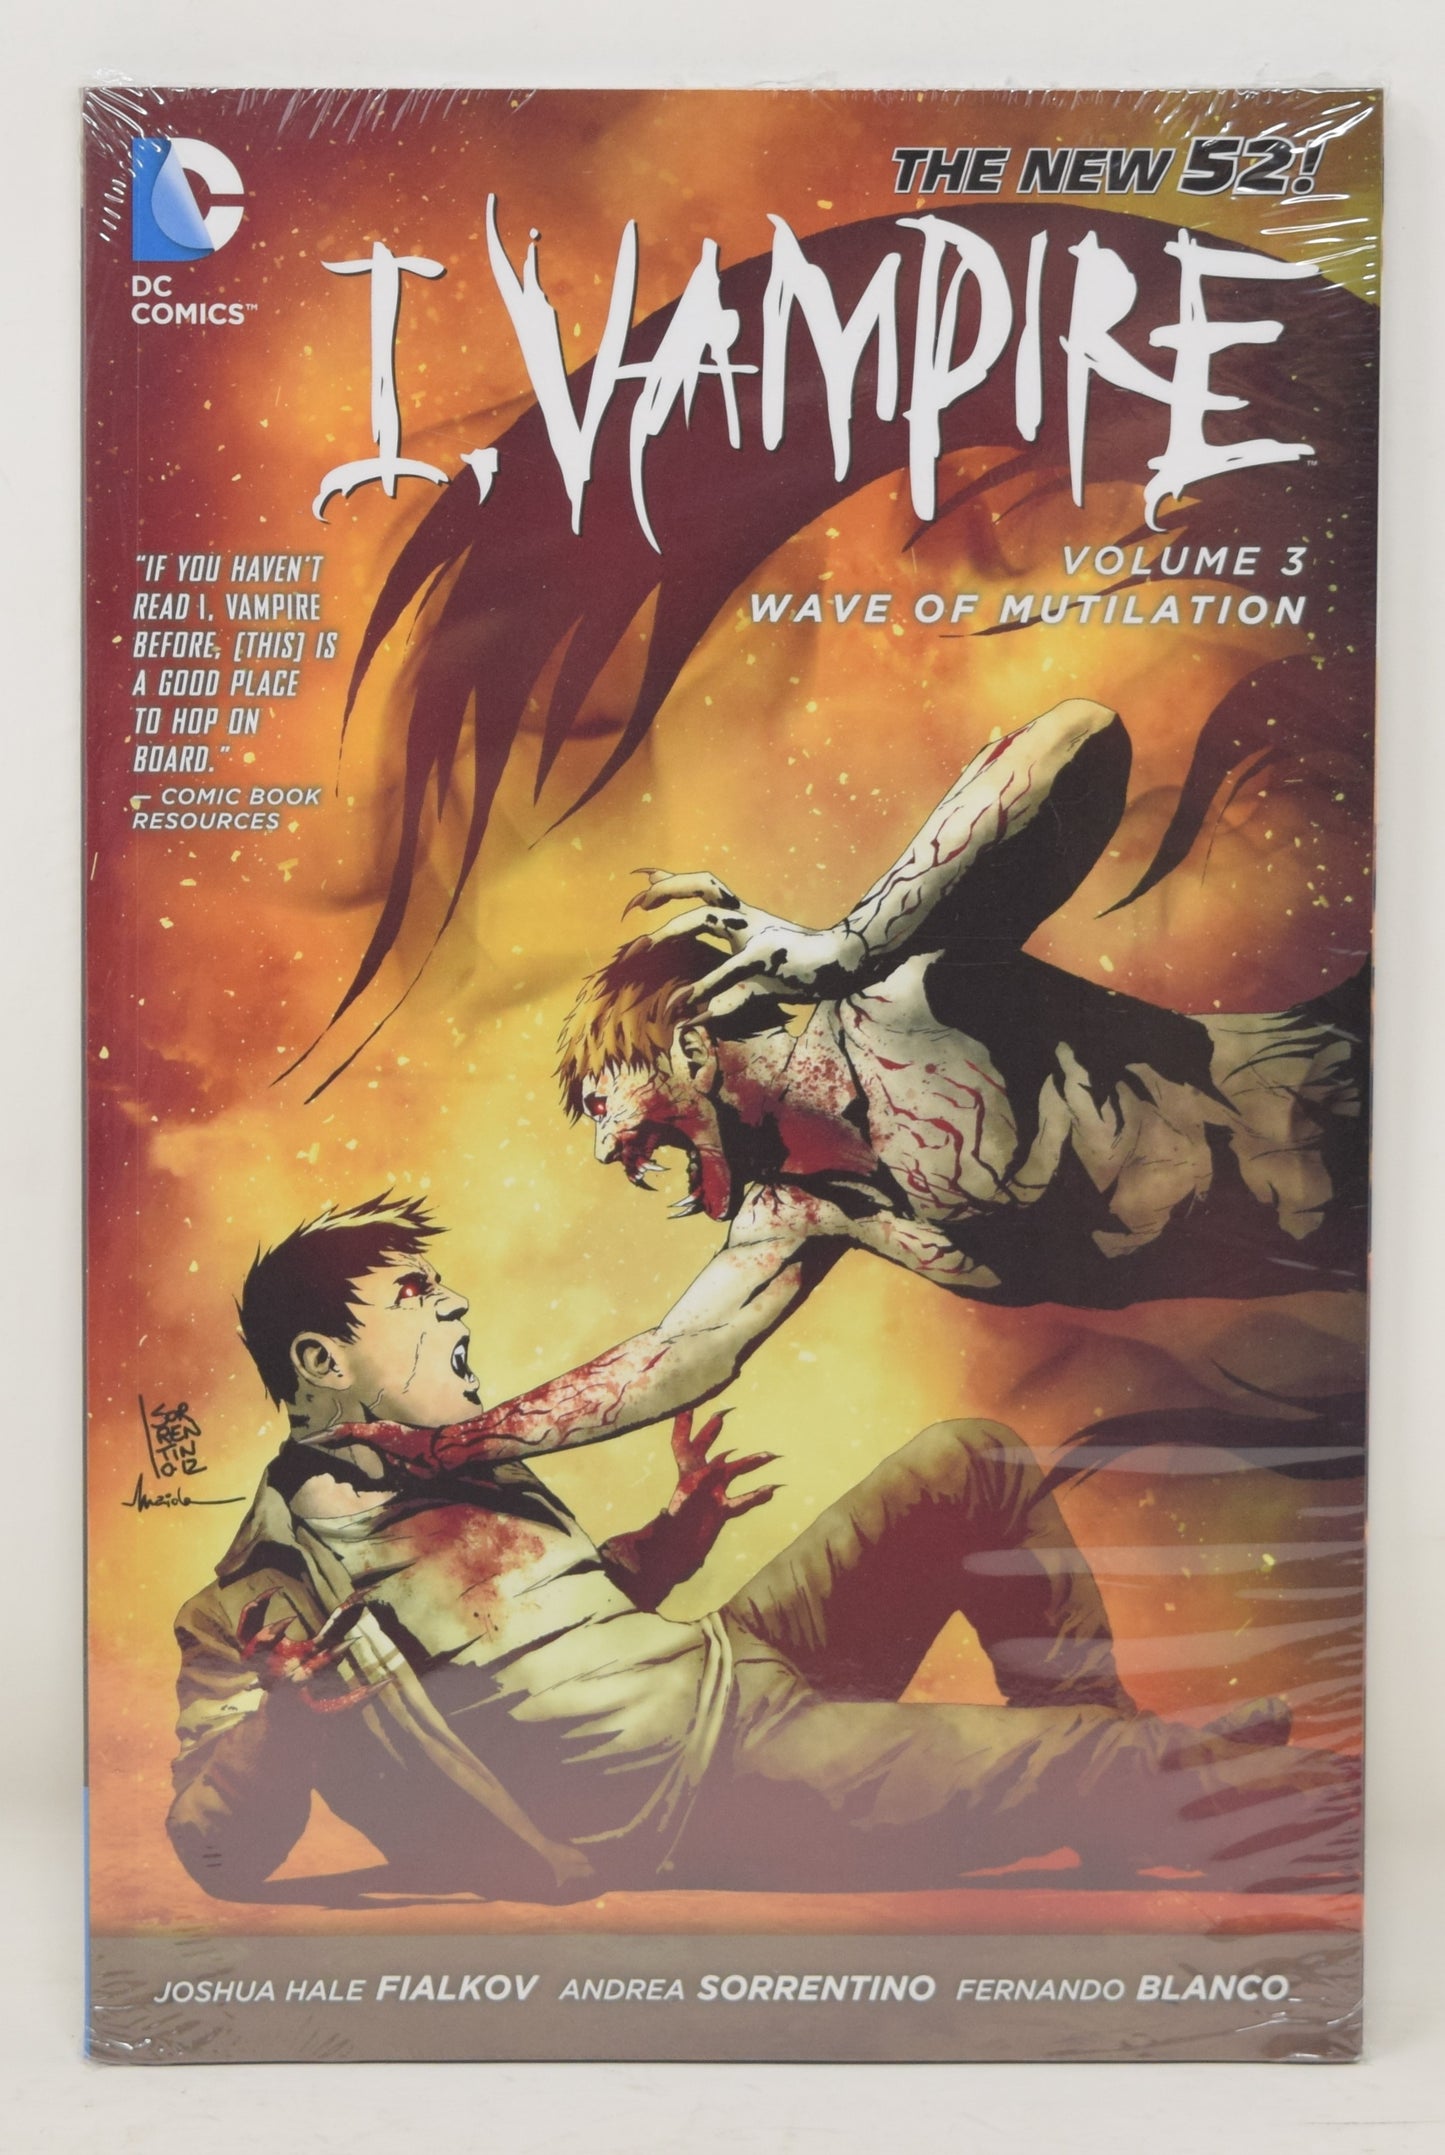 I, Vampire Vol 3 Wave of Mutilation DC 2013 GN NM New